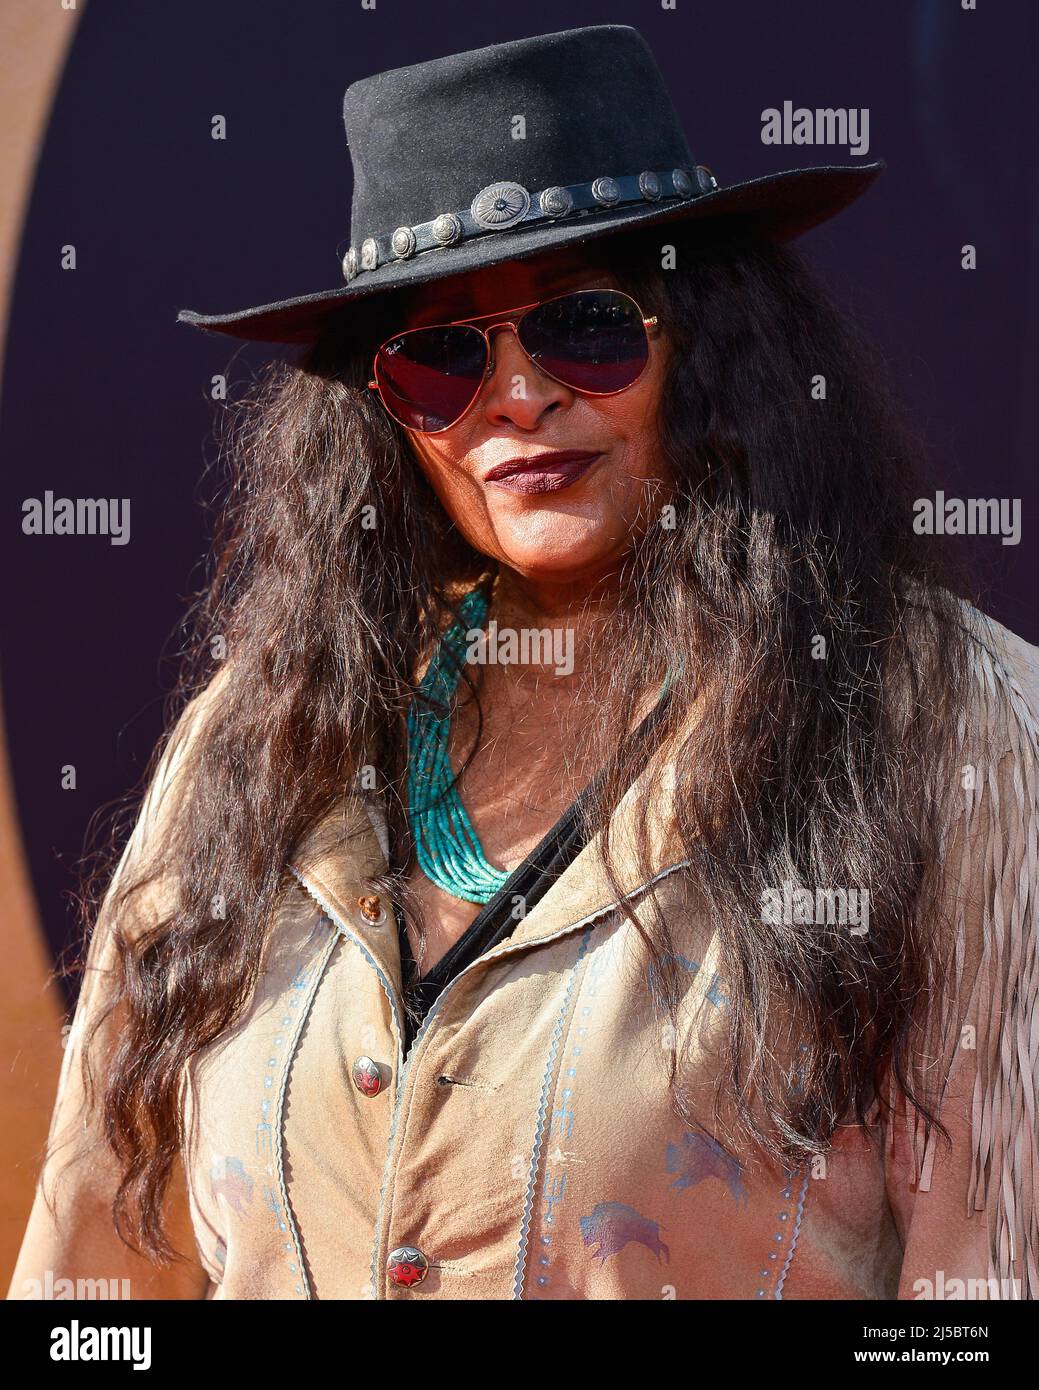 Los Angeles, USA. 21st Apr, 2022. HOLLYWOOD, LOS ANGELES, CALIFORNIA, USA - APRIL 21: American actress Pam Grier arrives at the 2022 TCM Classic Film Festival Opening Night 40th Anniversary Screening Of 'E.T. The Extra-Terrestrial' held at the TCL Chinese Theatre IMAX on April 21, 2022 in Hollywood, Los Angeles, California, United States. (Photo by Image Press Agency) Credit: Image Press Agency/Alamy Live News Stock Photo